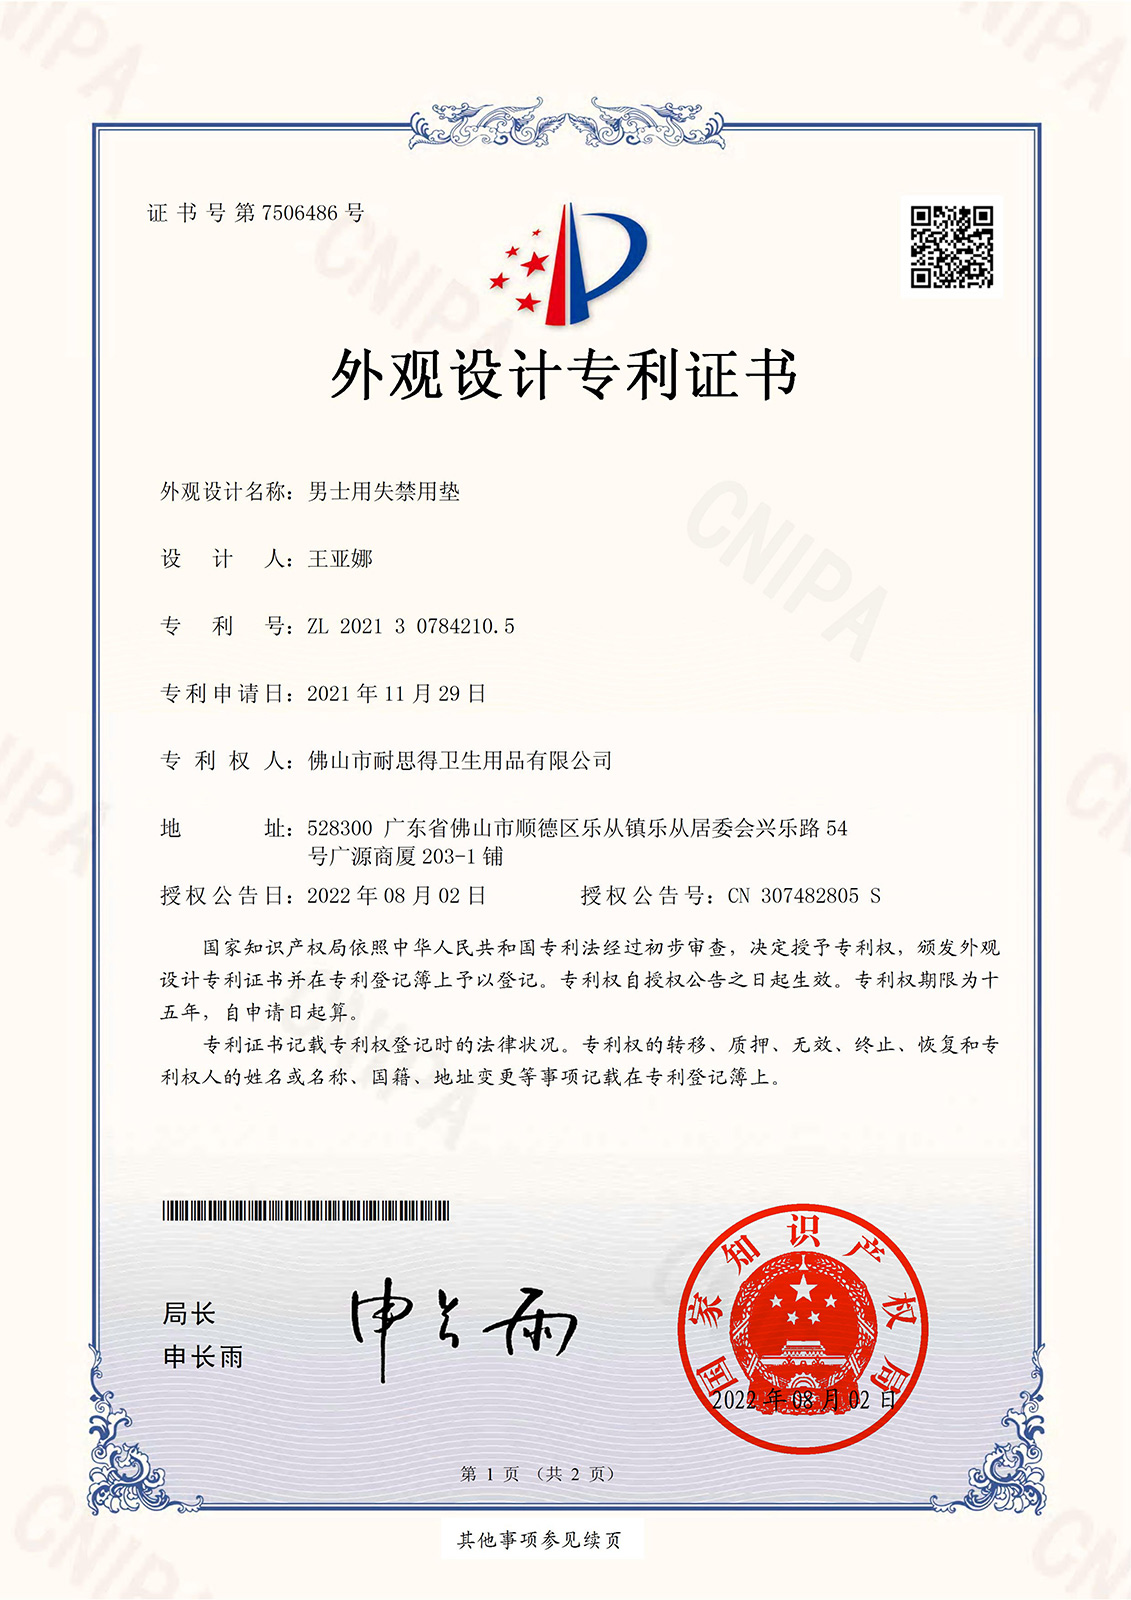 Men's Incontinence Pads Patent Certificate